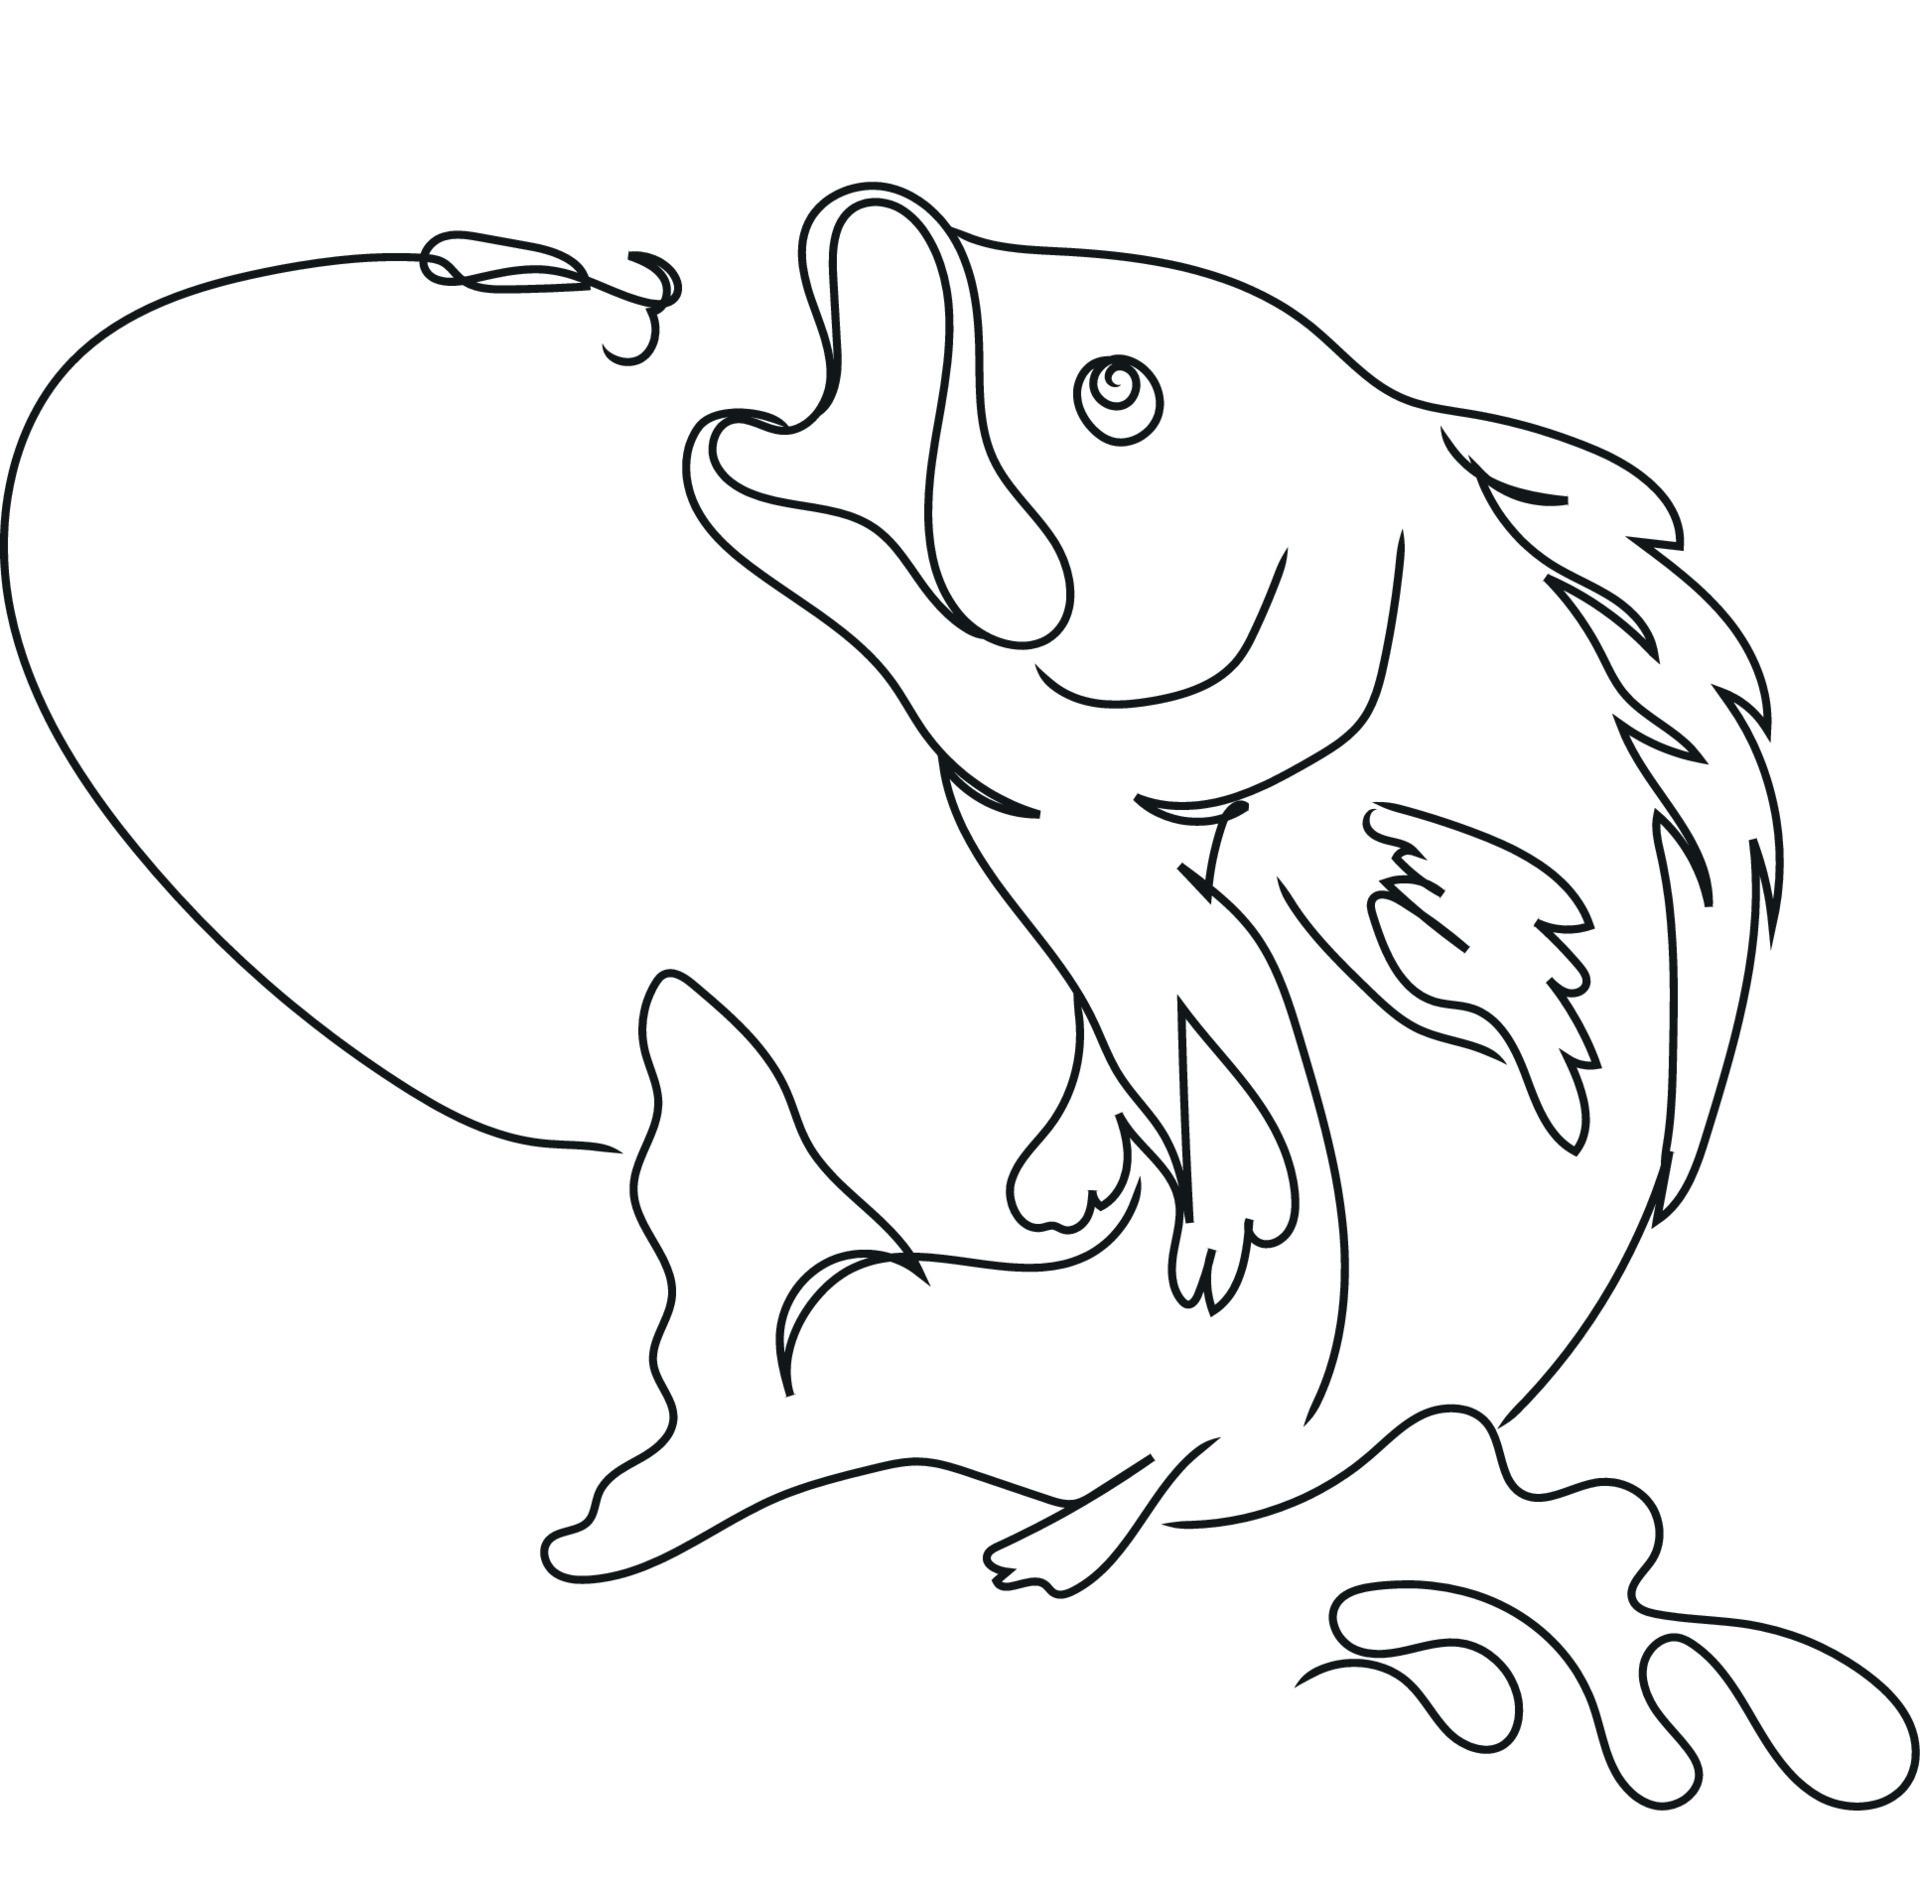 Little fish under water sketch icon Royalty Free Vector